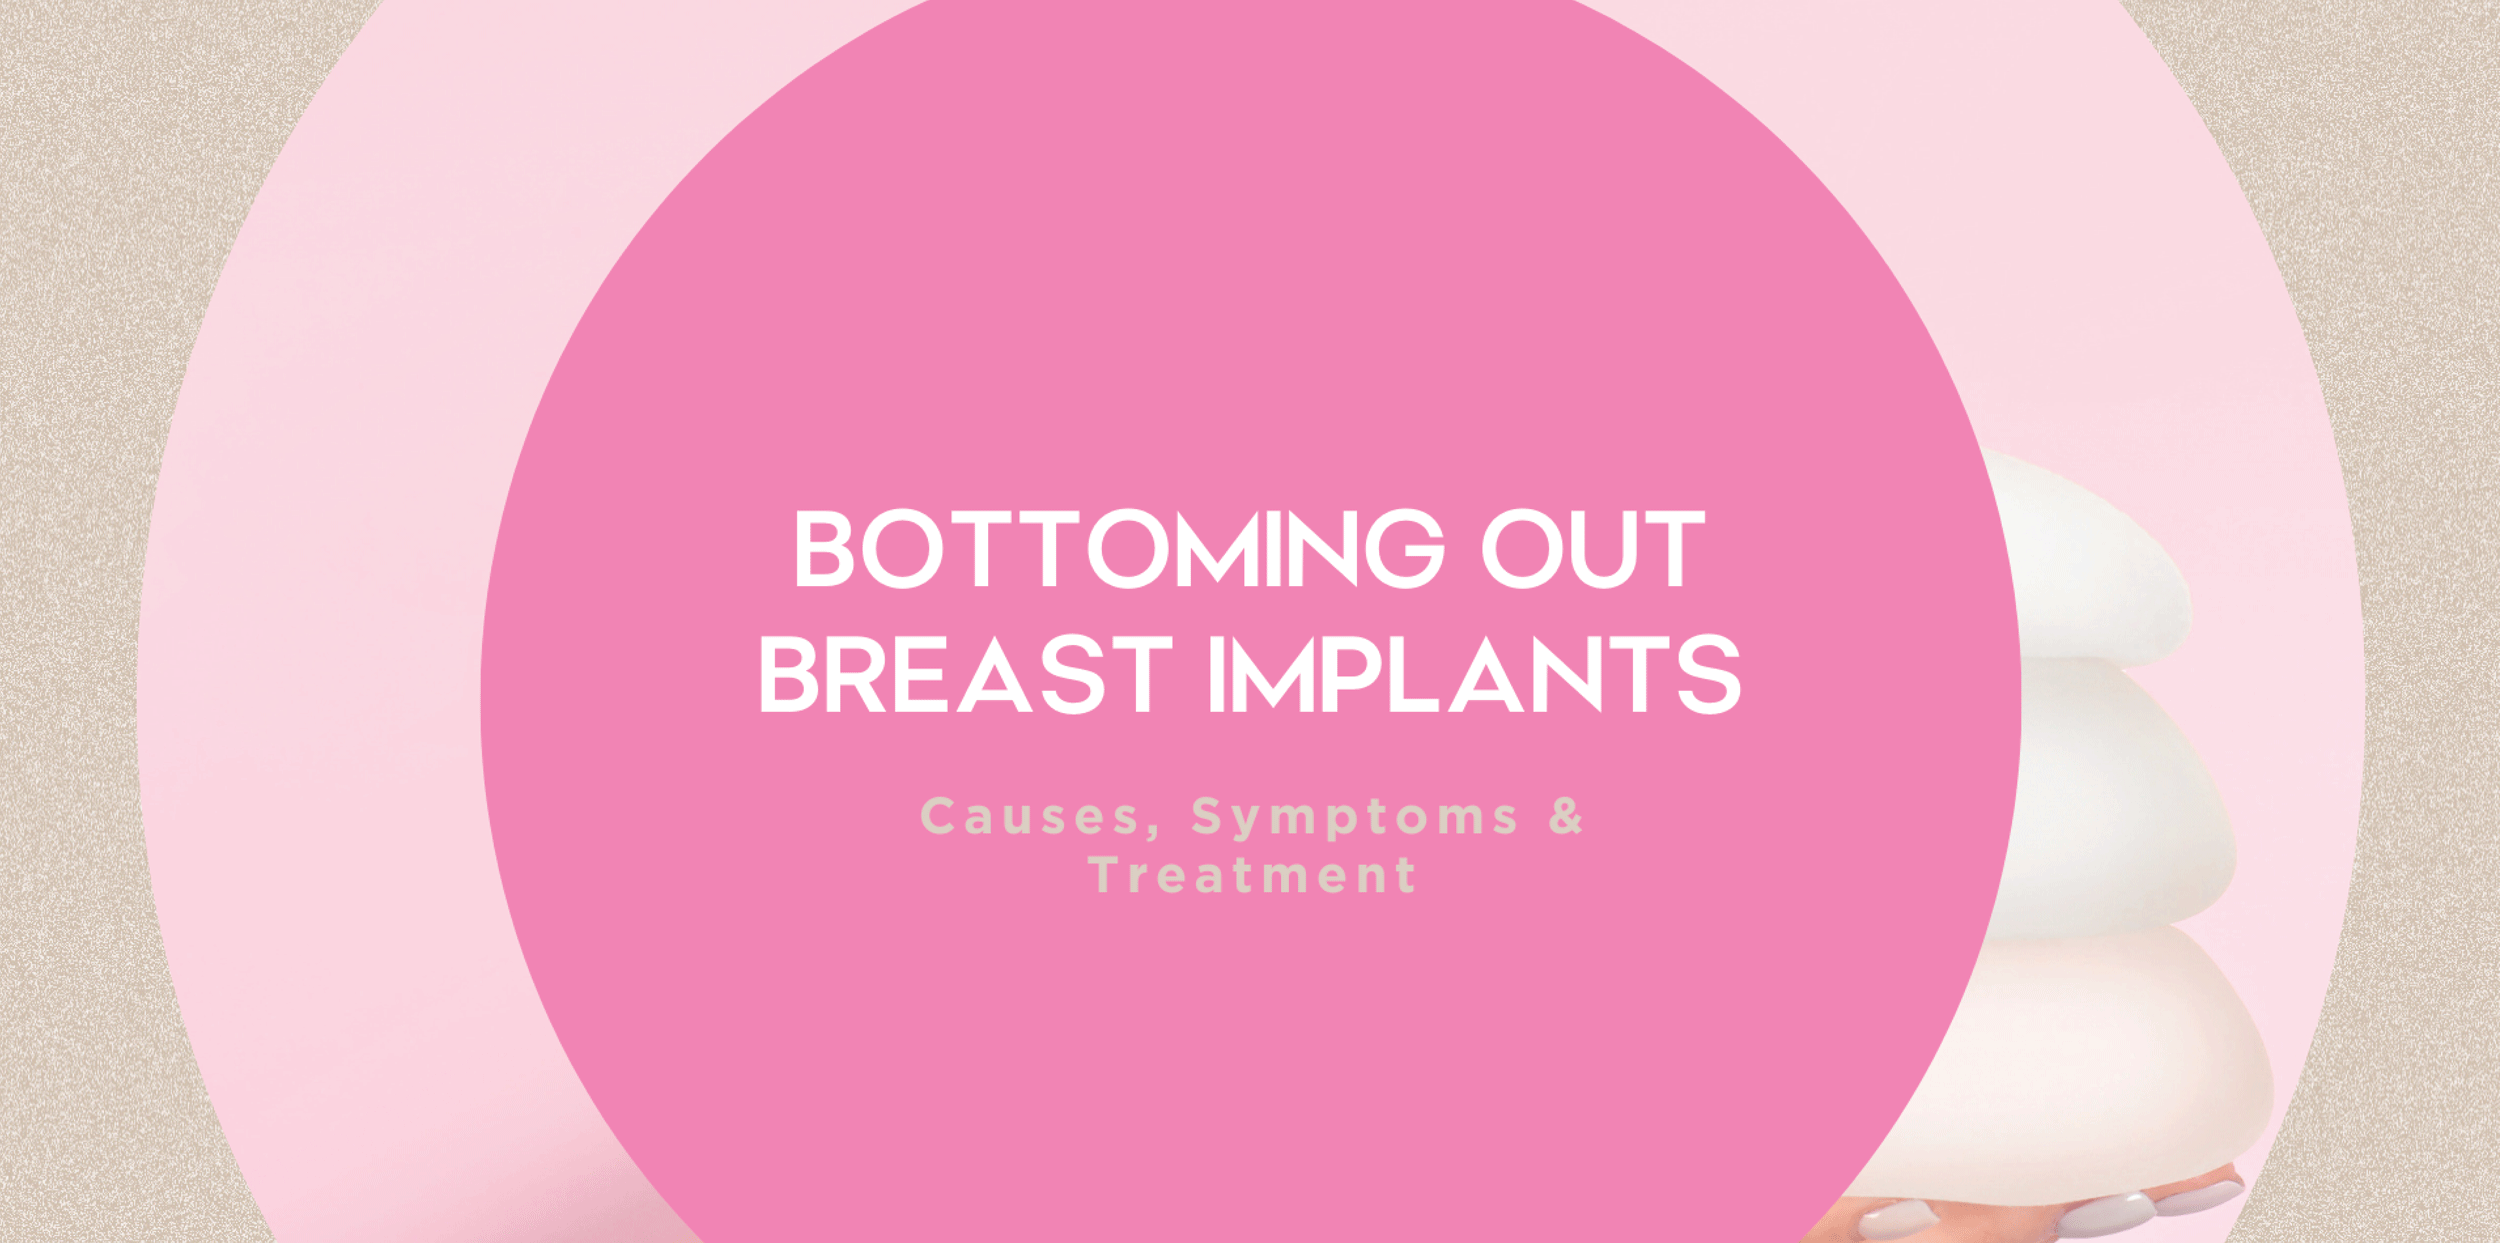 Bottoming Out Breast Implants - Causes, Symptoms & Treatment